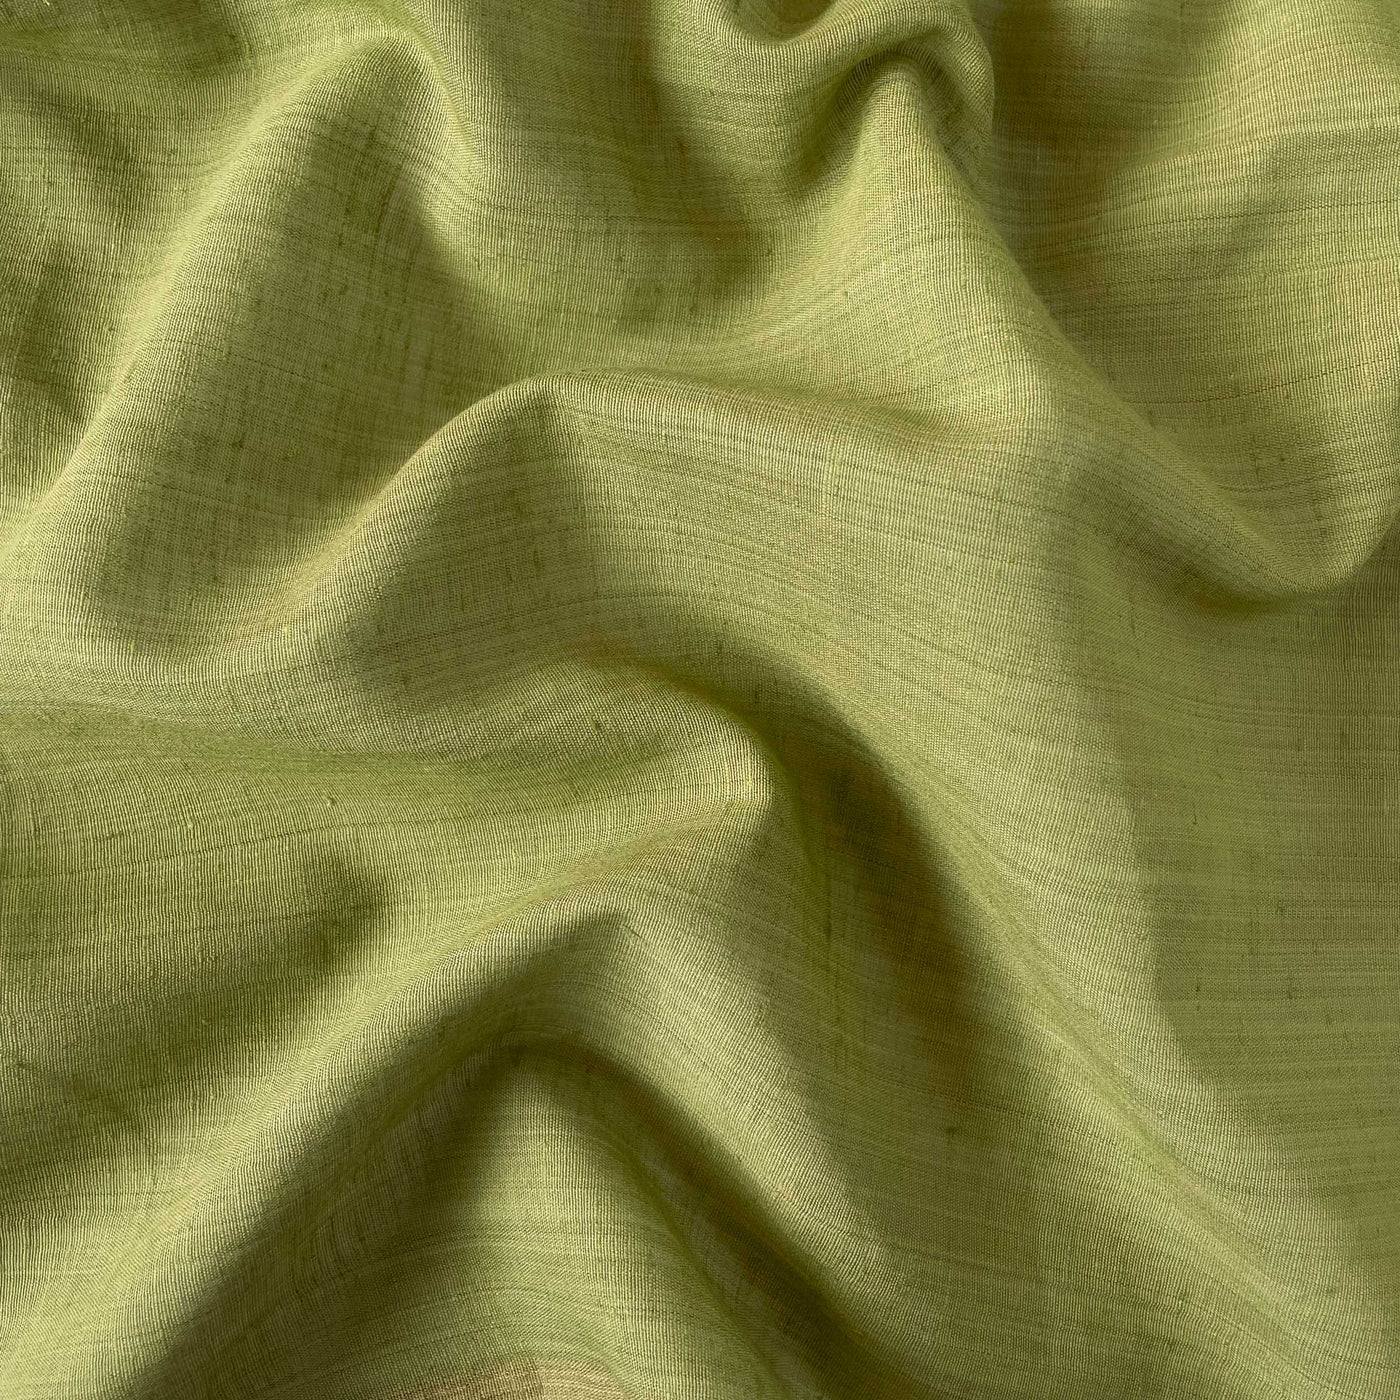 Blended Silk Linen Fabric Fabric Dusty Olive Green Blended Silk Linen Fabric (Width 58 Inches)